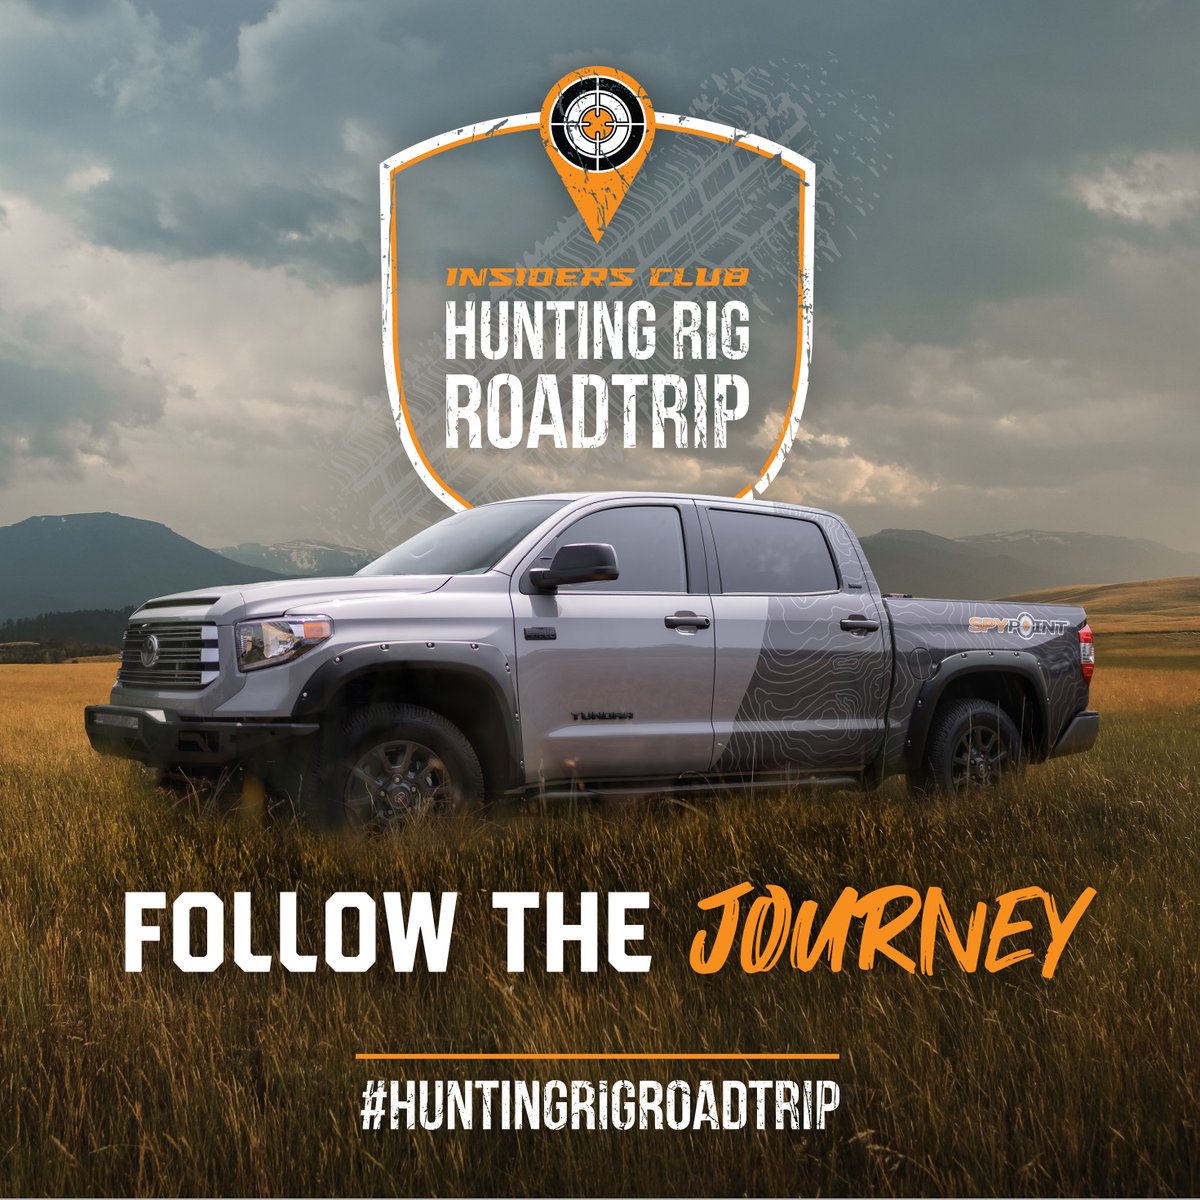 193 days later and the #HuntingRigRoadtrip has come to an end! Stay tuned to see who the lucky winner is!

#spypoint #whyispypoint #trailcamera #trailcam #teamspypoint